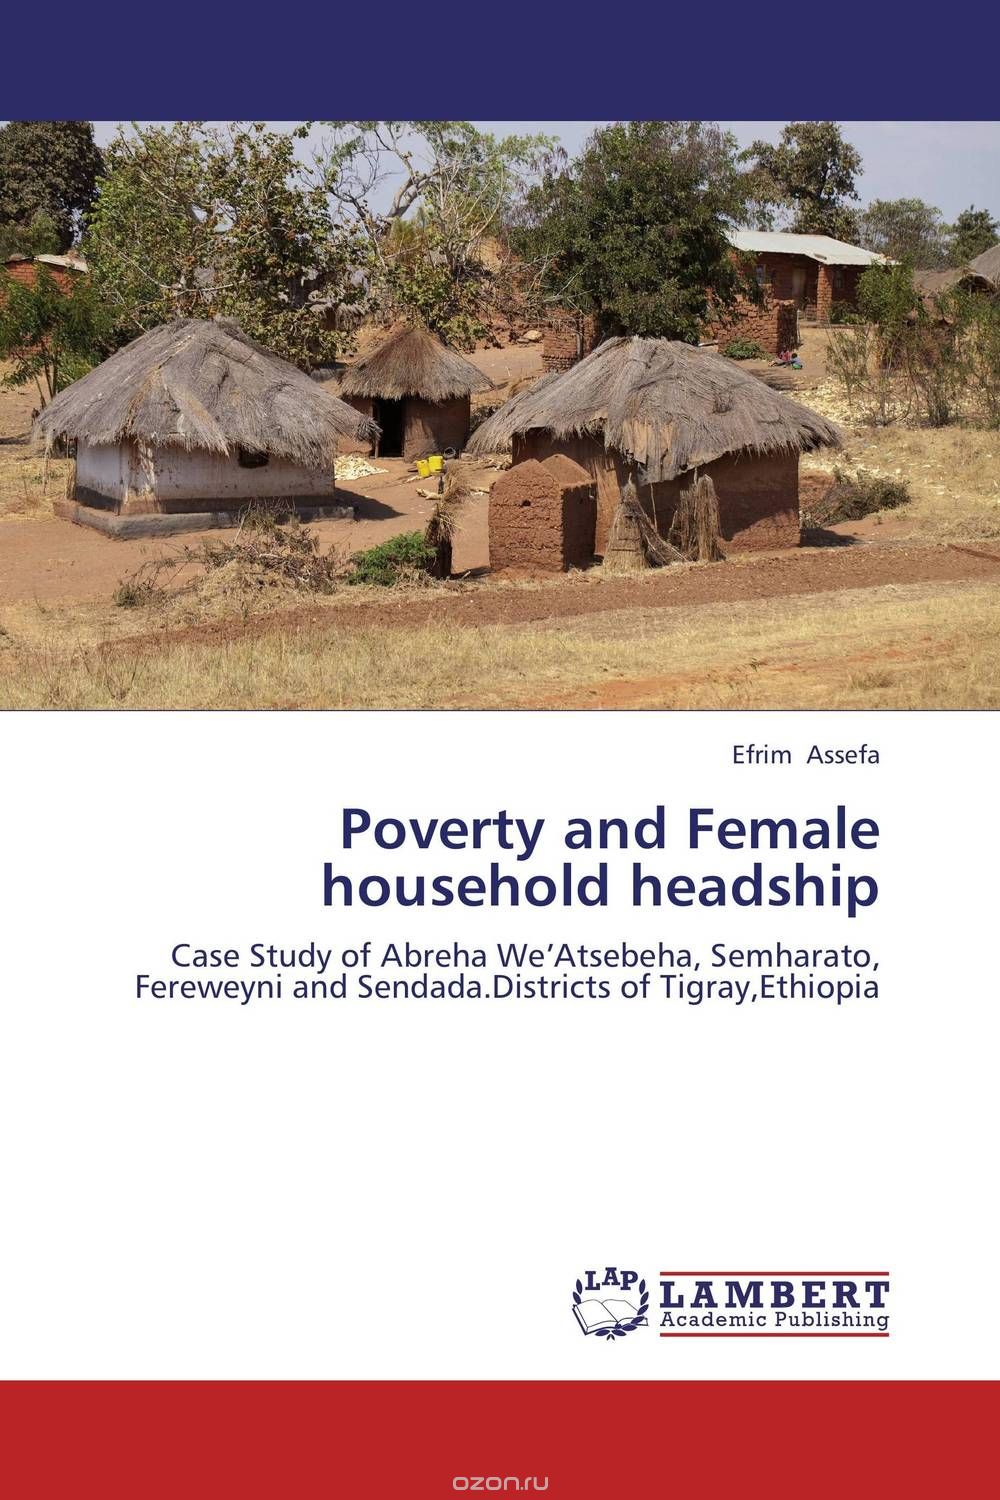 Poverty and Female household headship